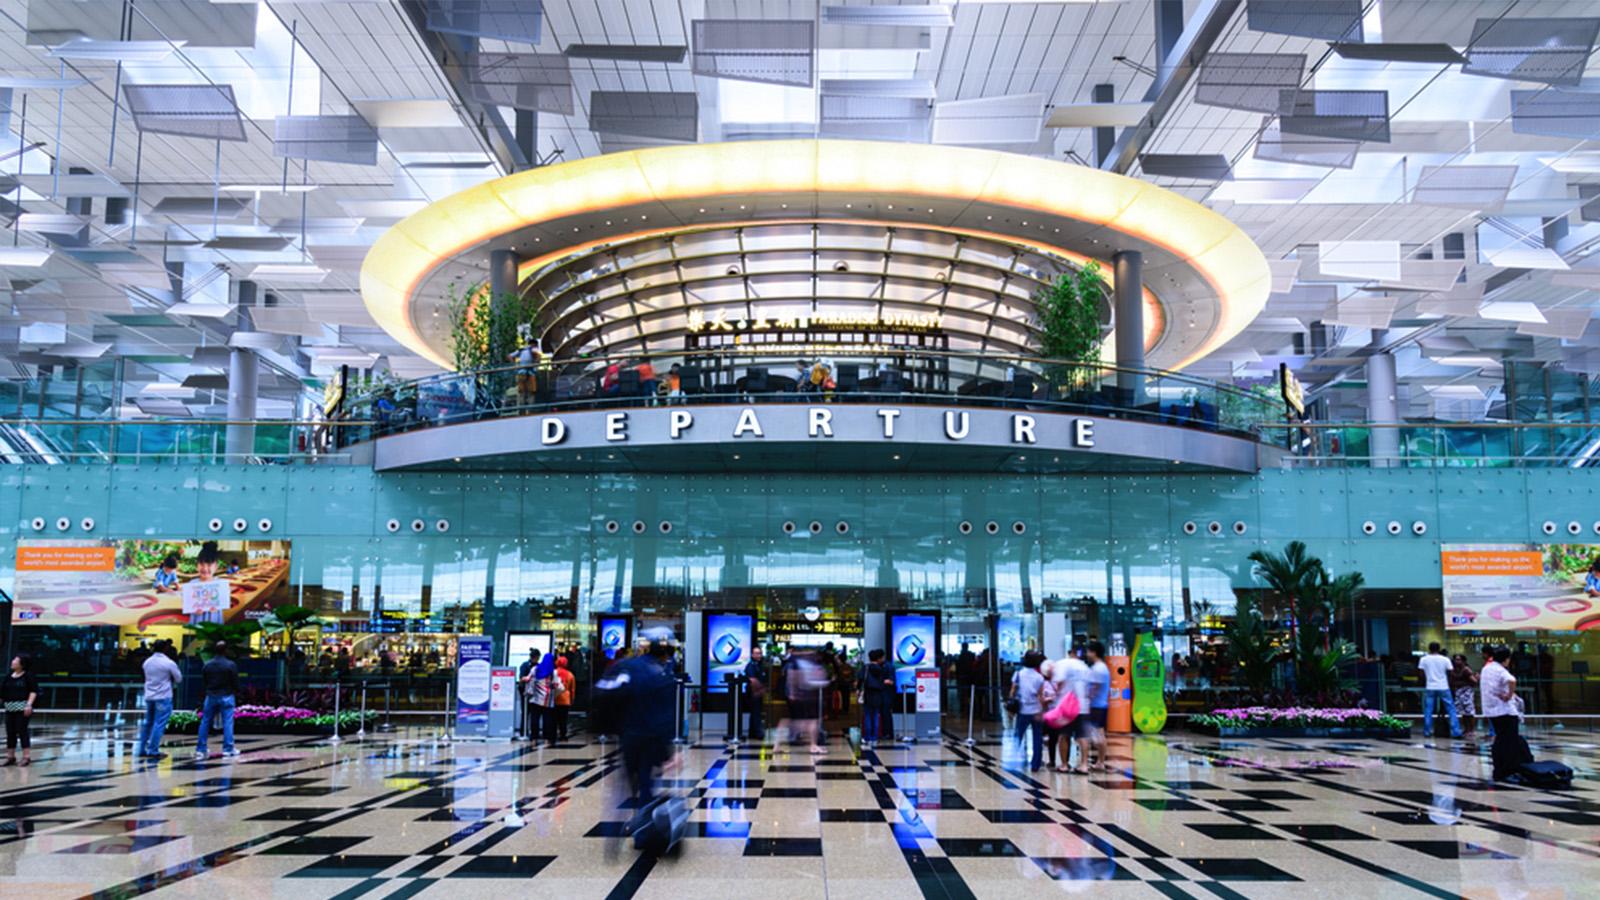 Singapore airport may use facial recognition systems to find